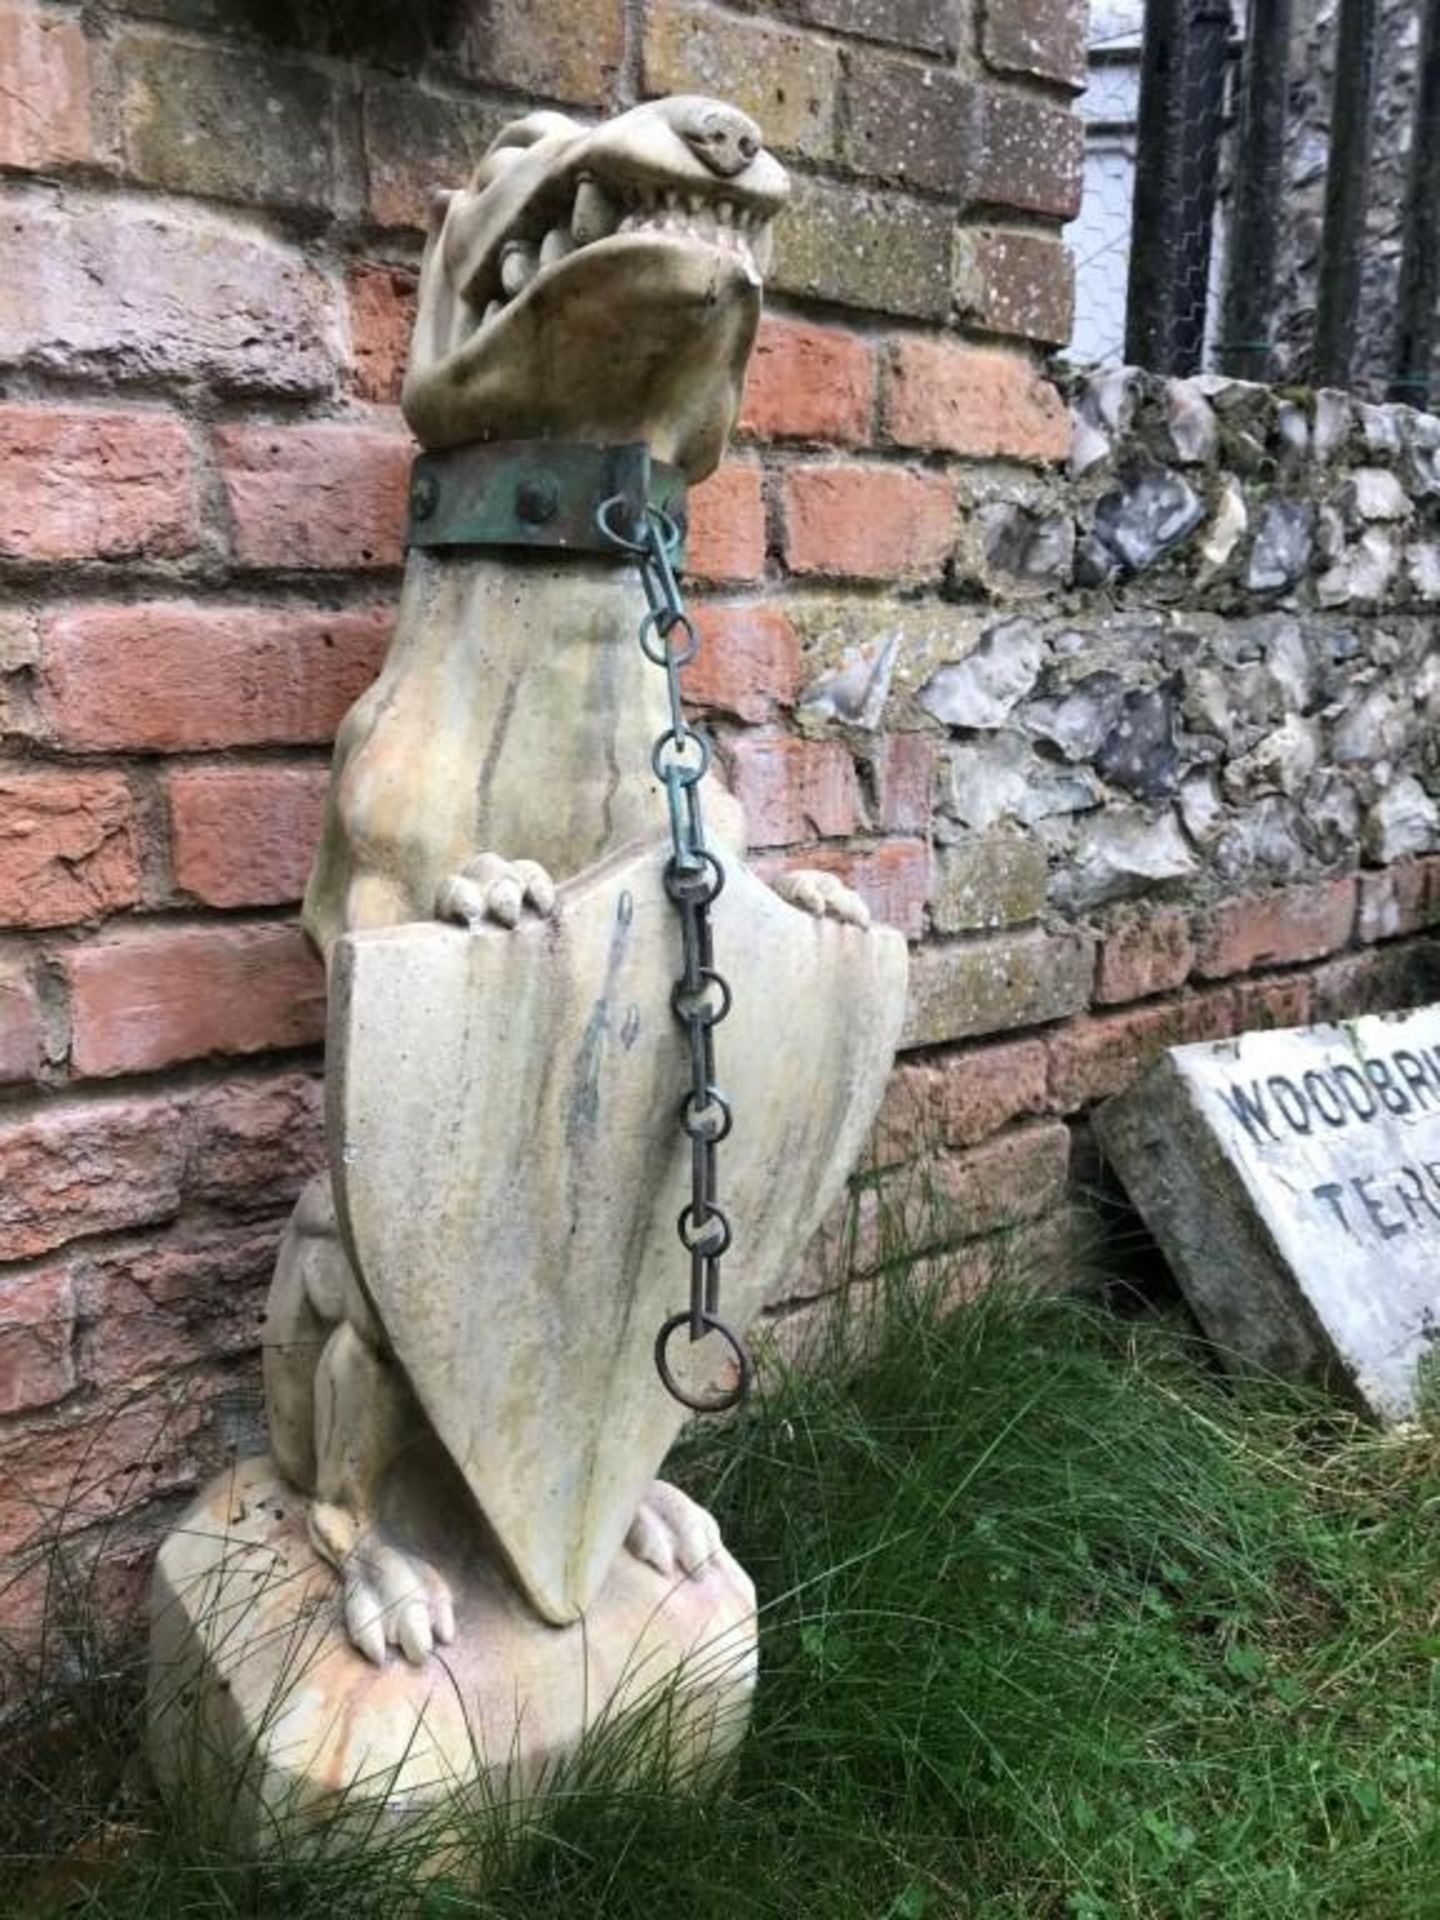 1 x Tall Gothic Style Guard Dog Statue Holding Shield with Metal Dog Colllar and Chain Lead - - Image 4 of 7